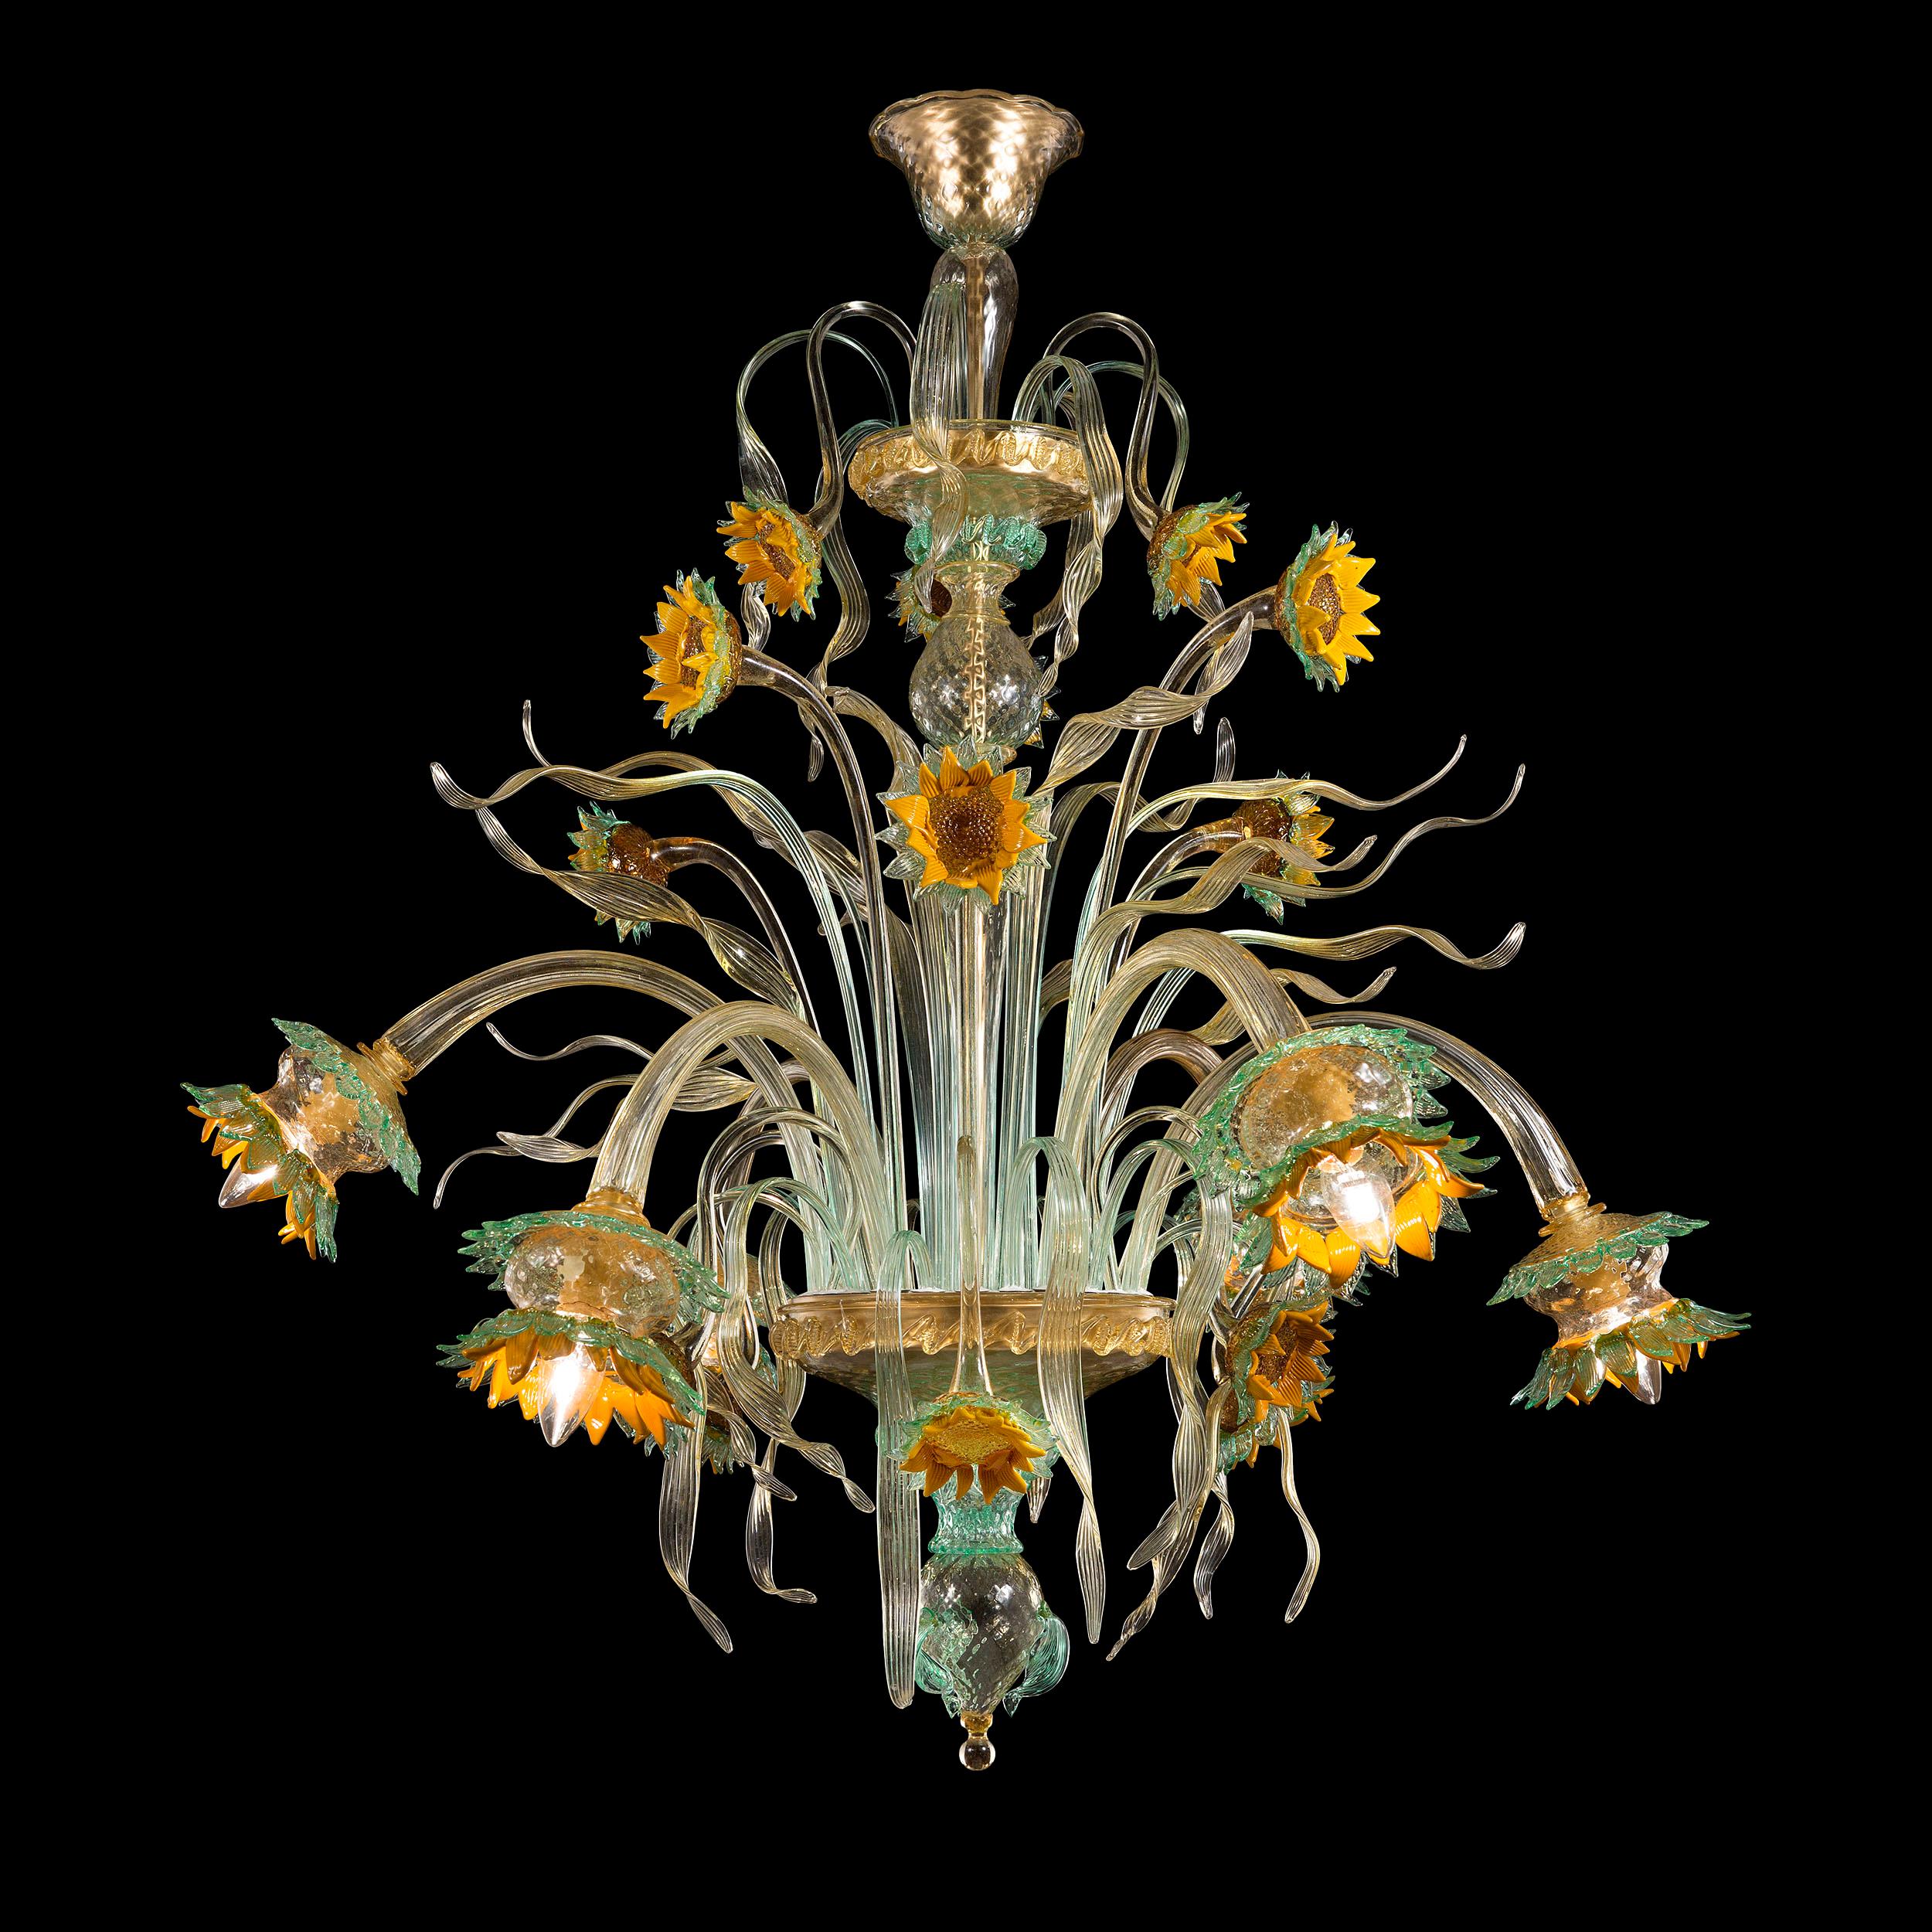 Artistic chandelier 6 arms clear-amber-green in Murano glass Girasole by Multiforme.
Girasole, as Rosae Rosarum and Iris, is one of our three collections inspired from the flowers. But the venetian chandelier series Girasole is also a tribute to